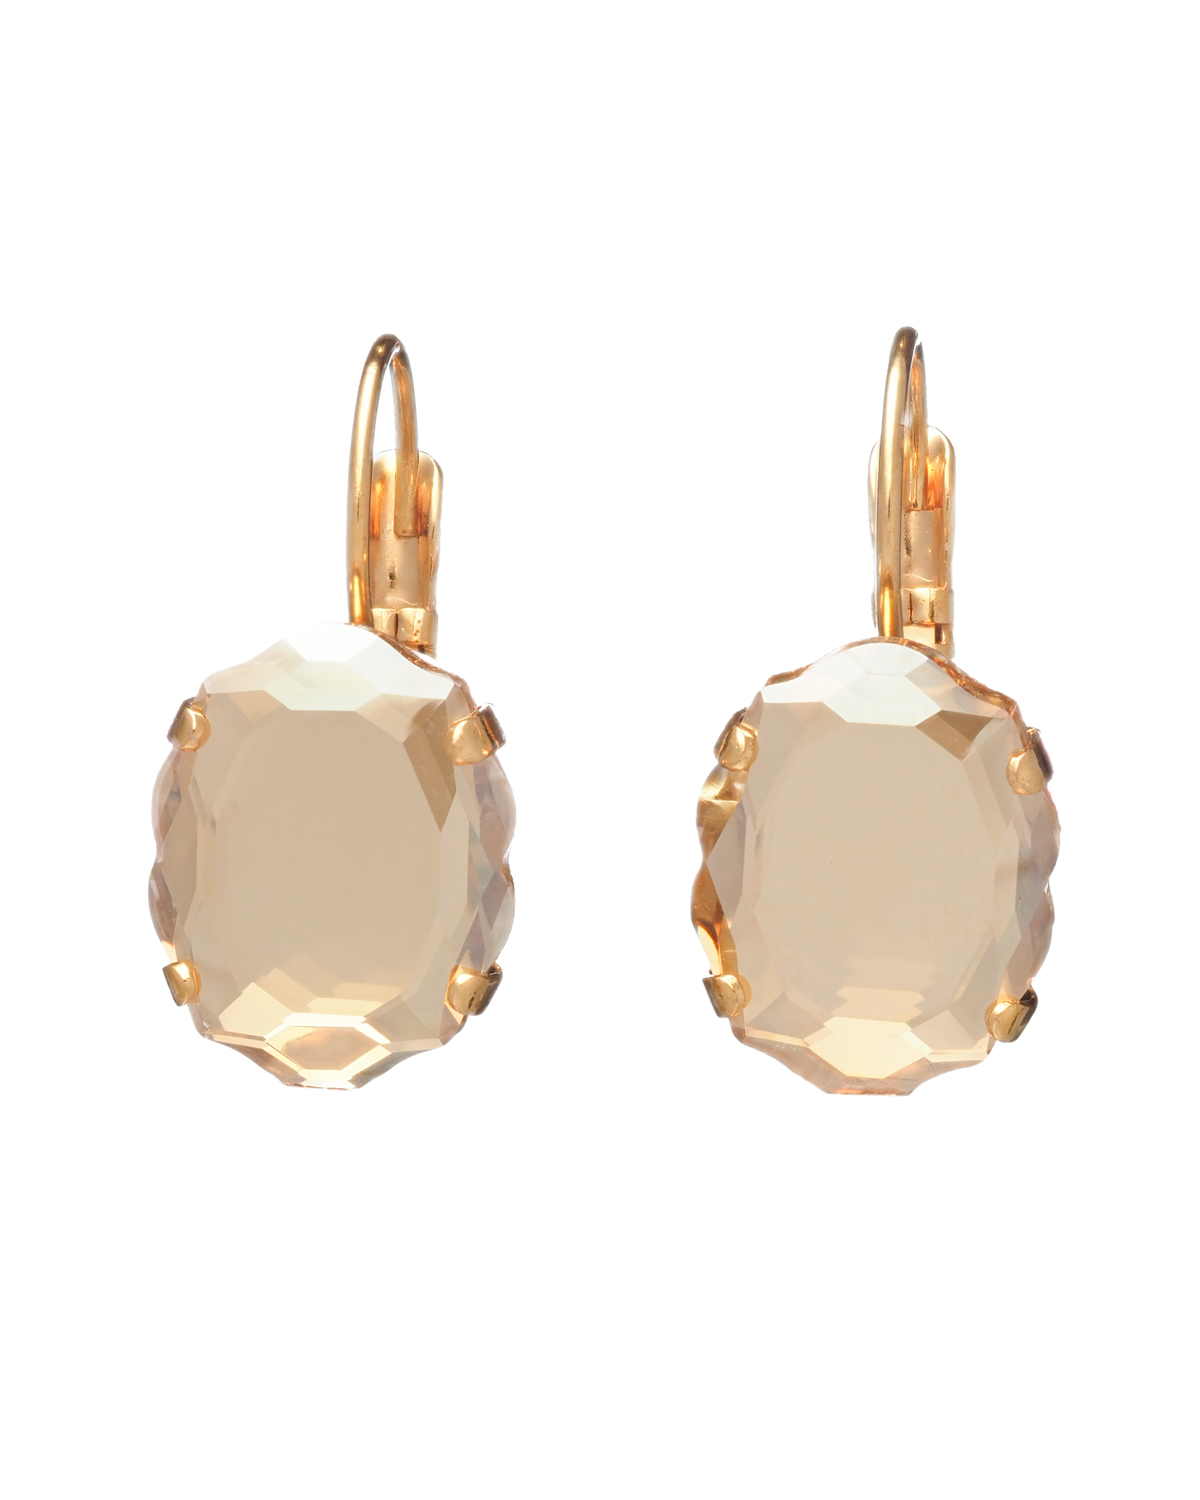 Crystal Golden Baroque Mirror Earrings - Gold plated